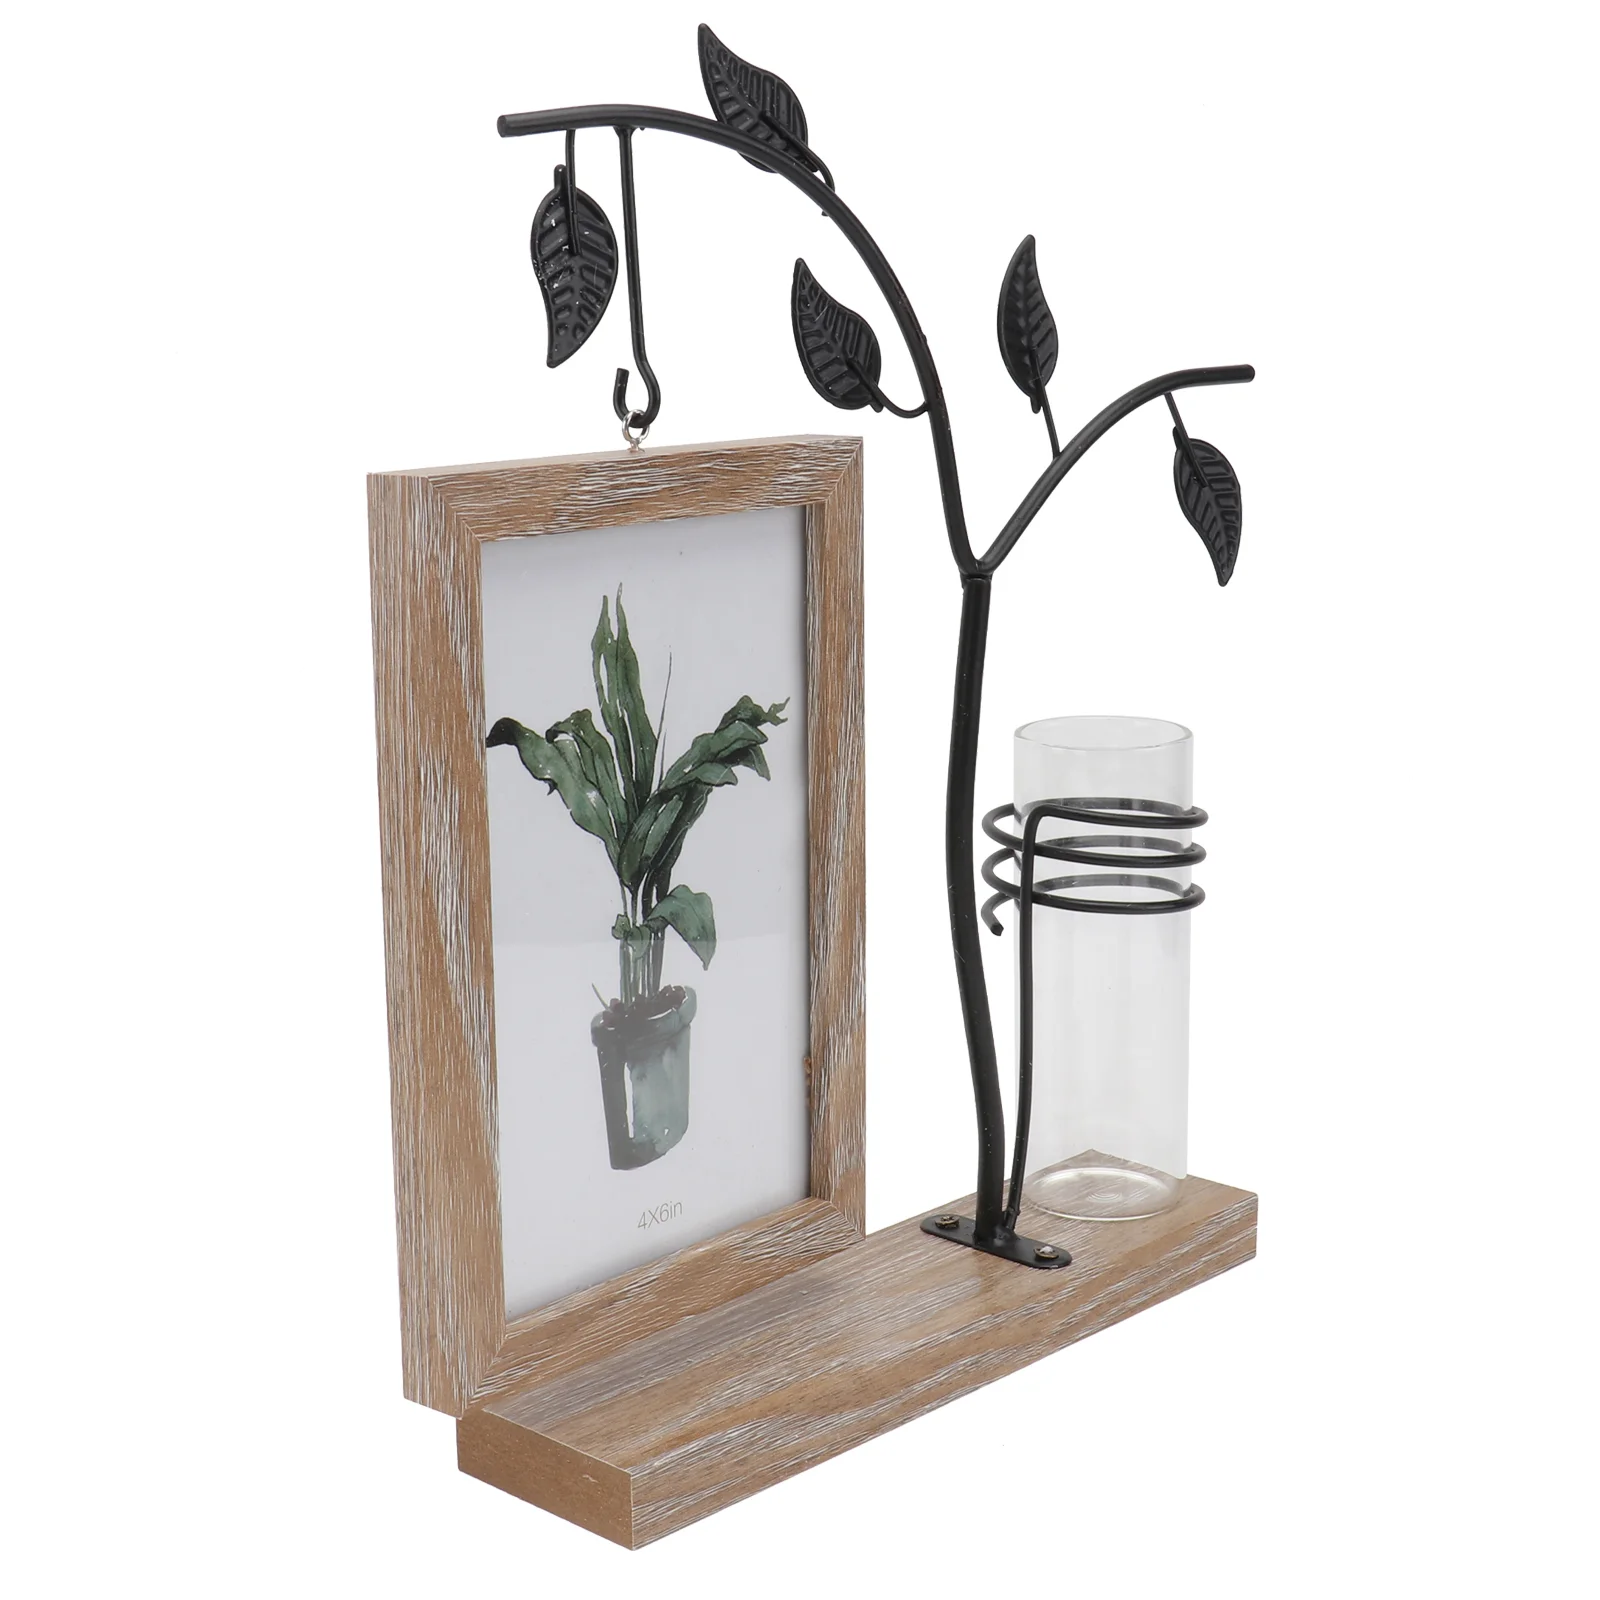 

6 Inch Wrought Iron Photo Frame Double-side Display Tool Glass Frames Ornaments Picture Classic Hydroponics Holder Vases